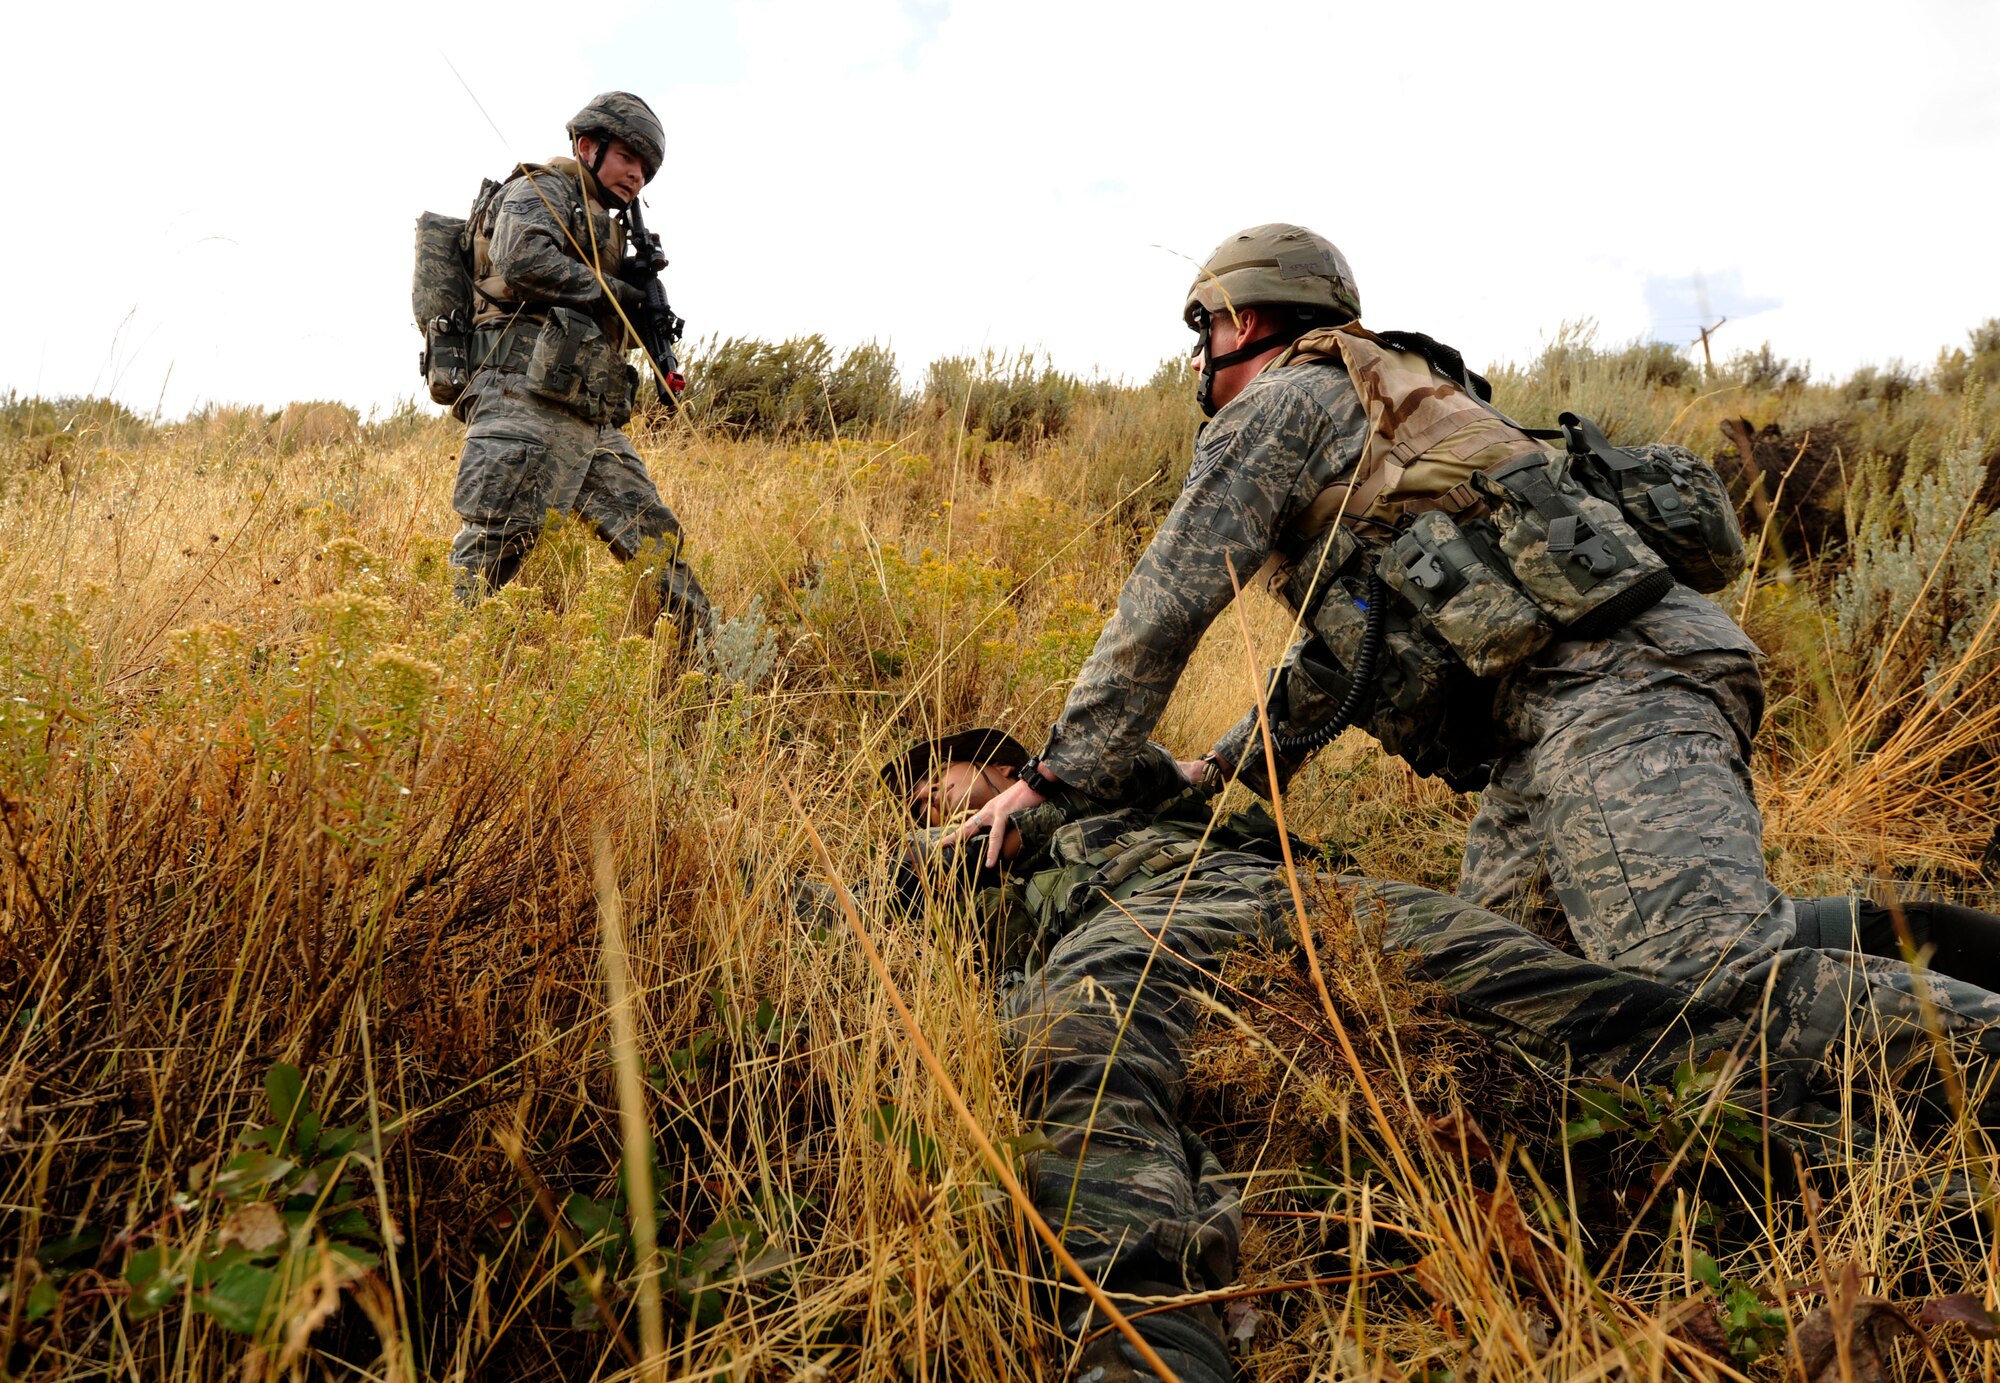 Members of the 419th Security Forces Squadron search a fatally wounded "insurgent" during Operational Readiness Exercise 10-4 at Hill Air Force Base, Utah, Oct. 7, 2010.  The exercise will prepare Airmen for an upcoming inspection.  (U.S. Air Force photo/Airman 1st Class Devin Doskey)